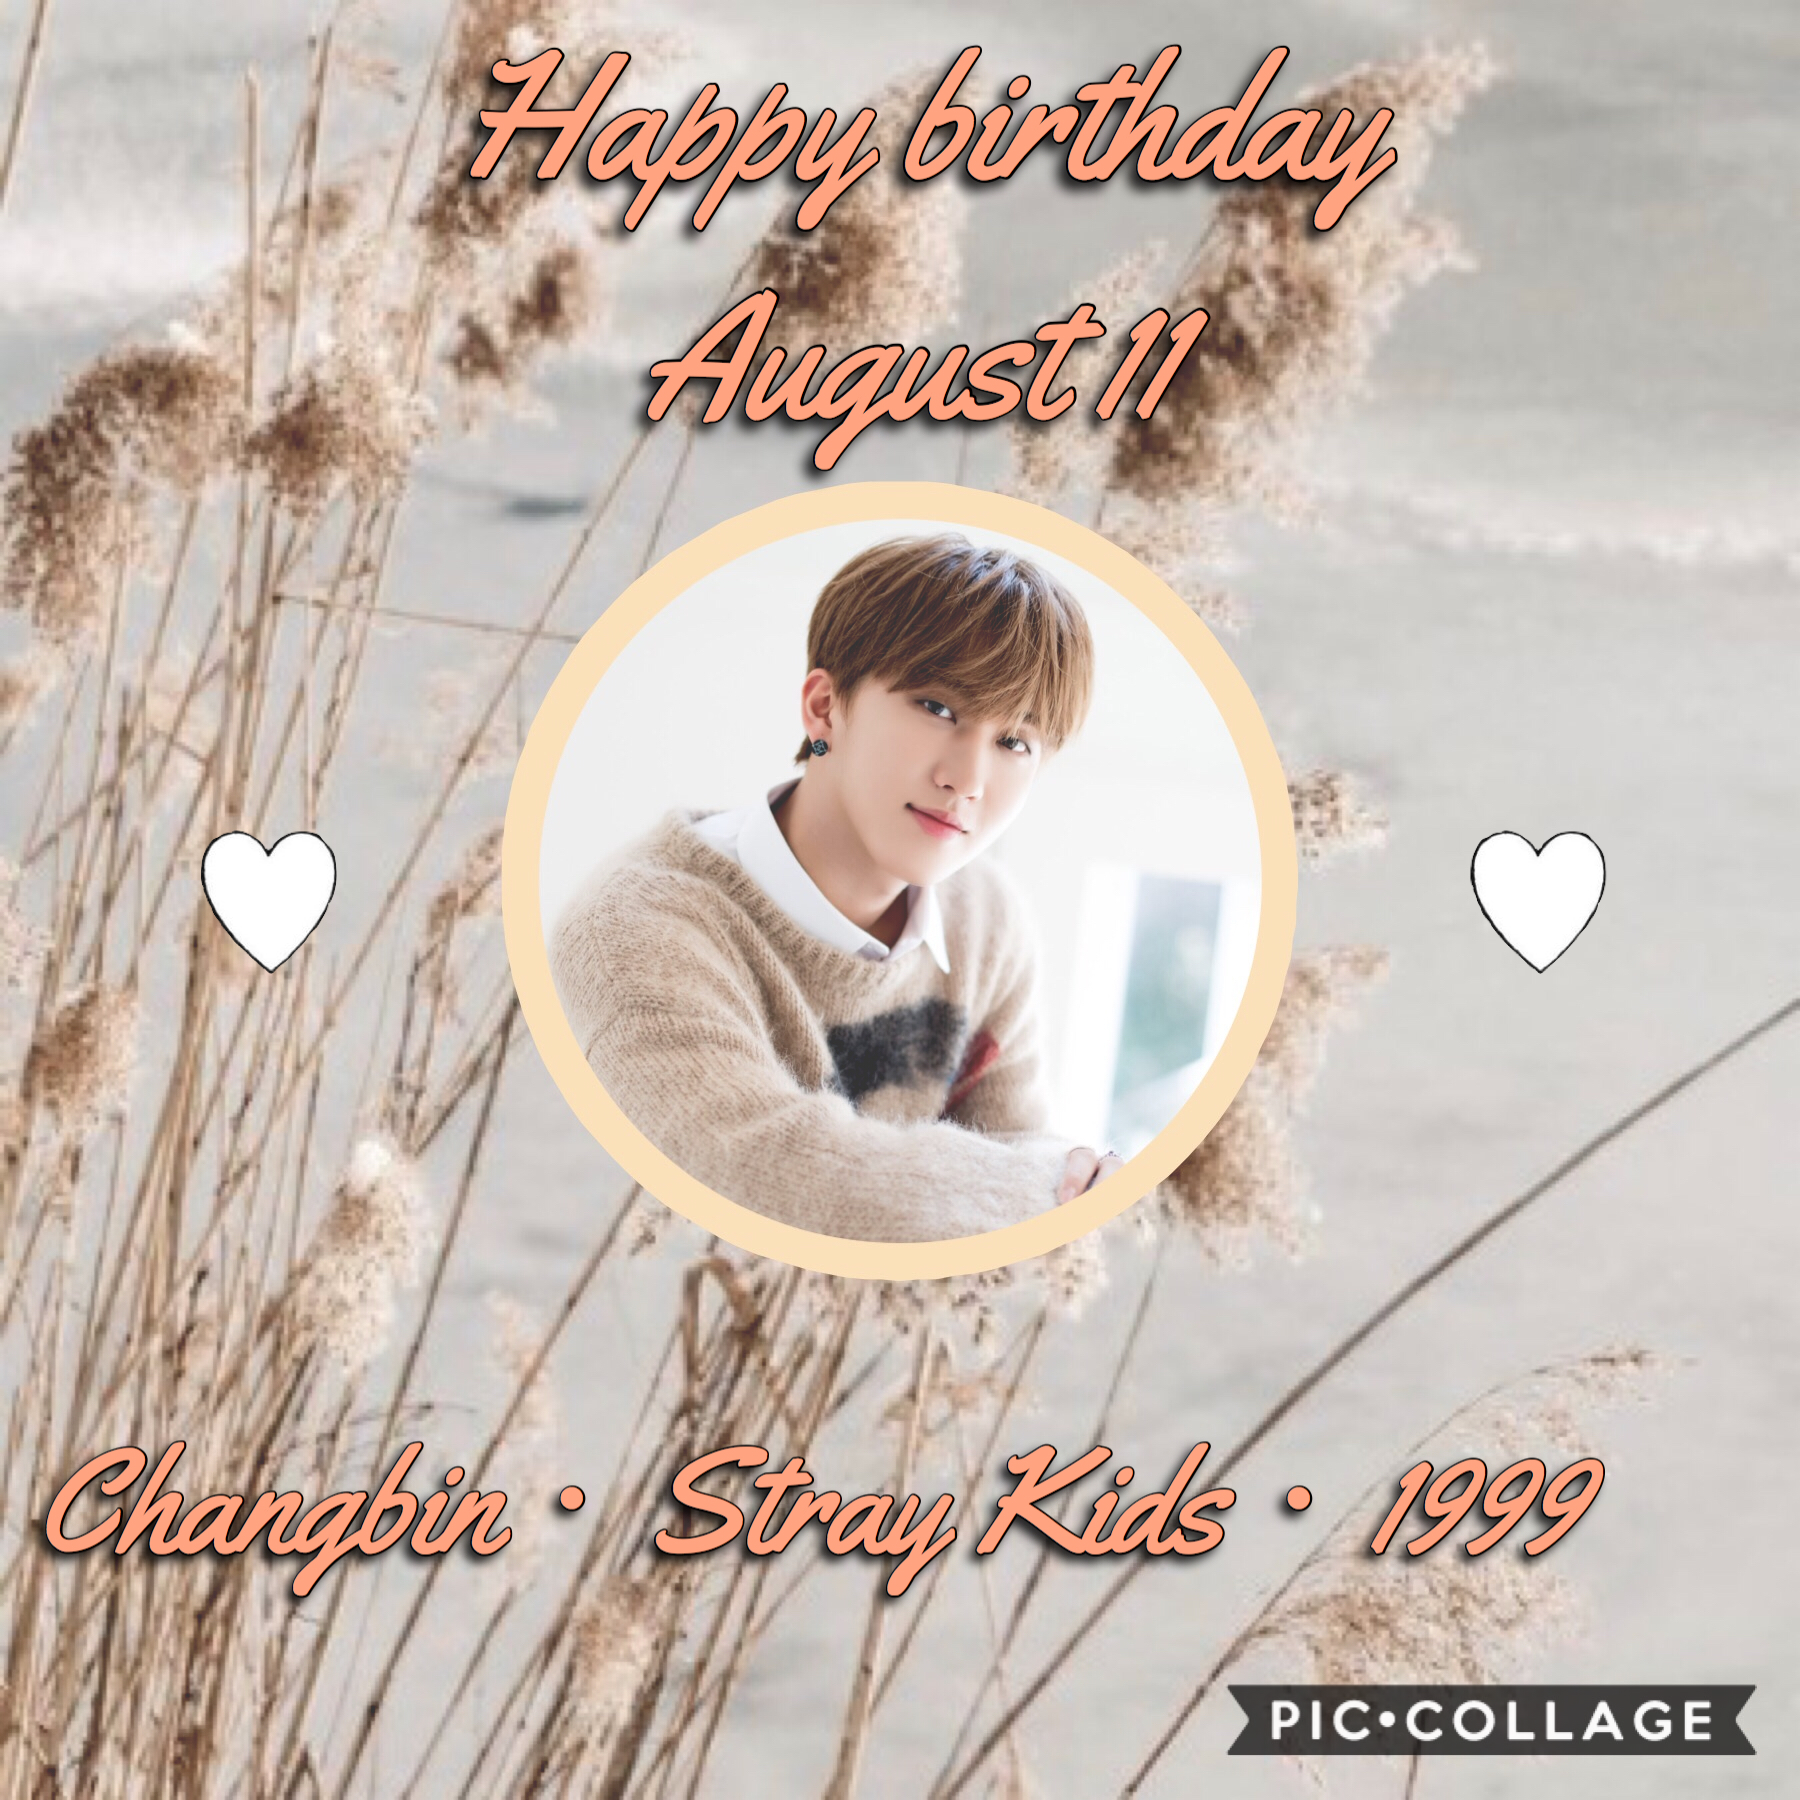 •🌻🍃•
Happy birthday baby Changbinnieee💓This man can do it allll and he spits literal fire istg
Other birthdays:
•Former ONF’s Laun~ Aug. 12
•f(x)’s Luna~ Aug.12
•Secret Number’s Lea~ Aug.12
•CLC’s Yujin~ Aug. 12
🌻🍃~Whoop~🍃🌻